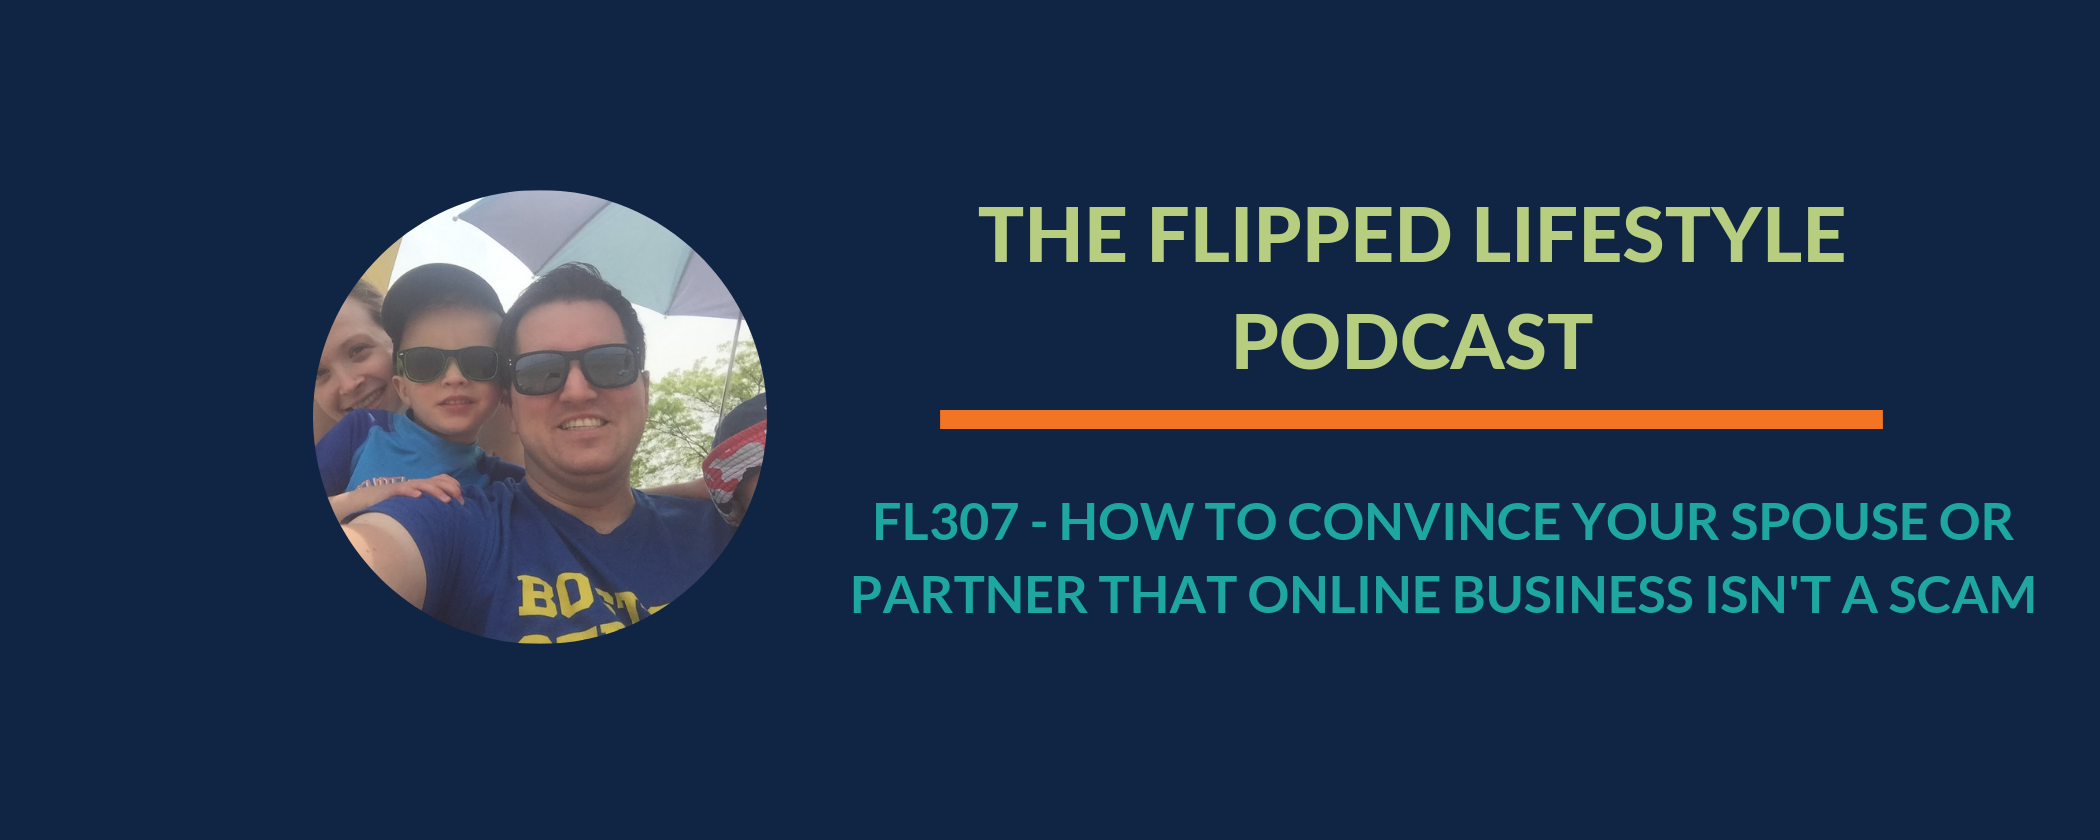 EARLY PODCAST: FL307 – How To Convince Your Spouse or Partner that Online Business Isn’t a Scam